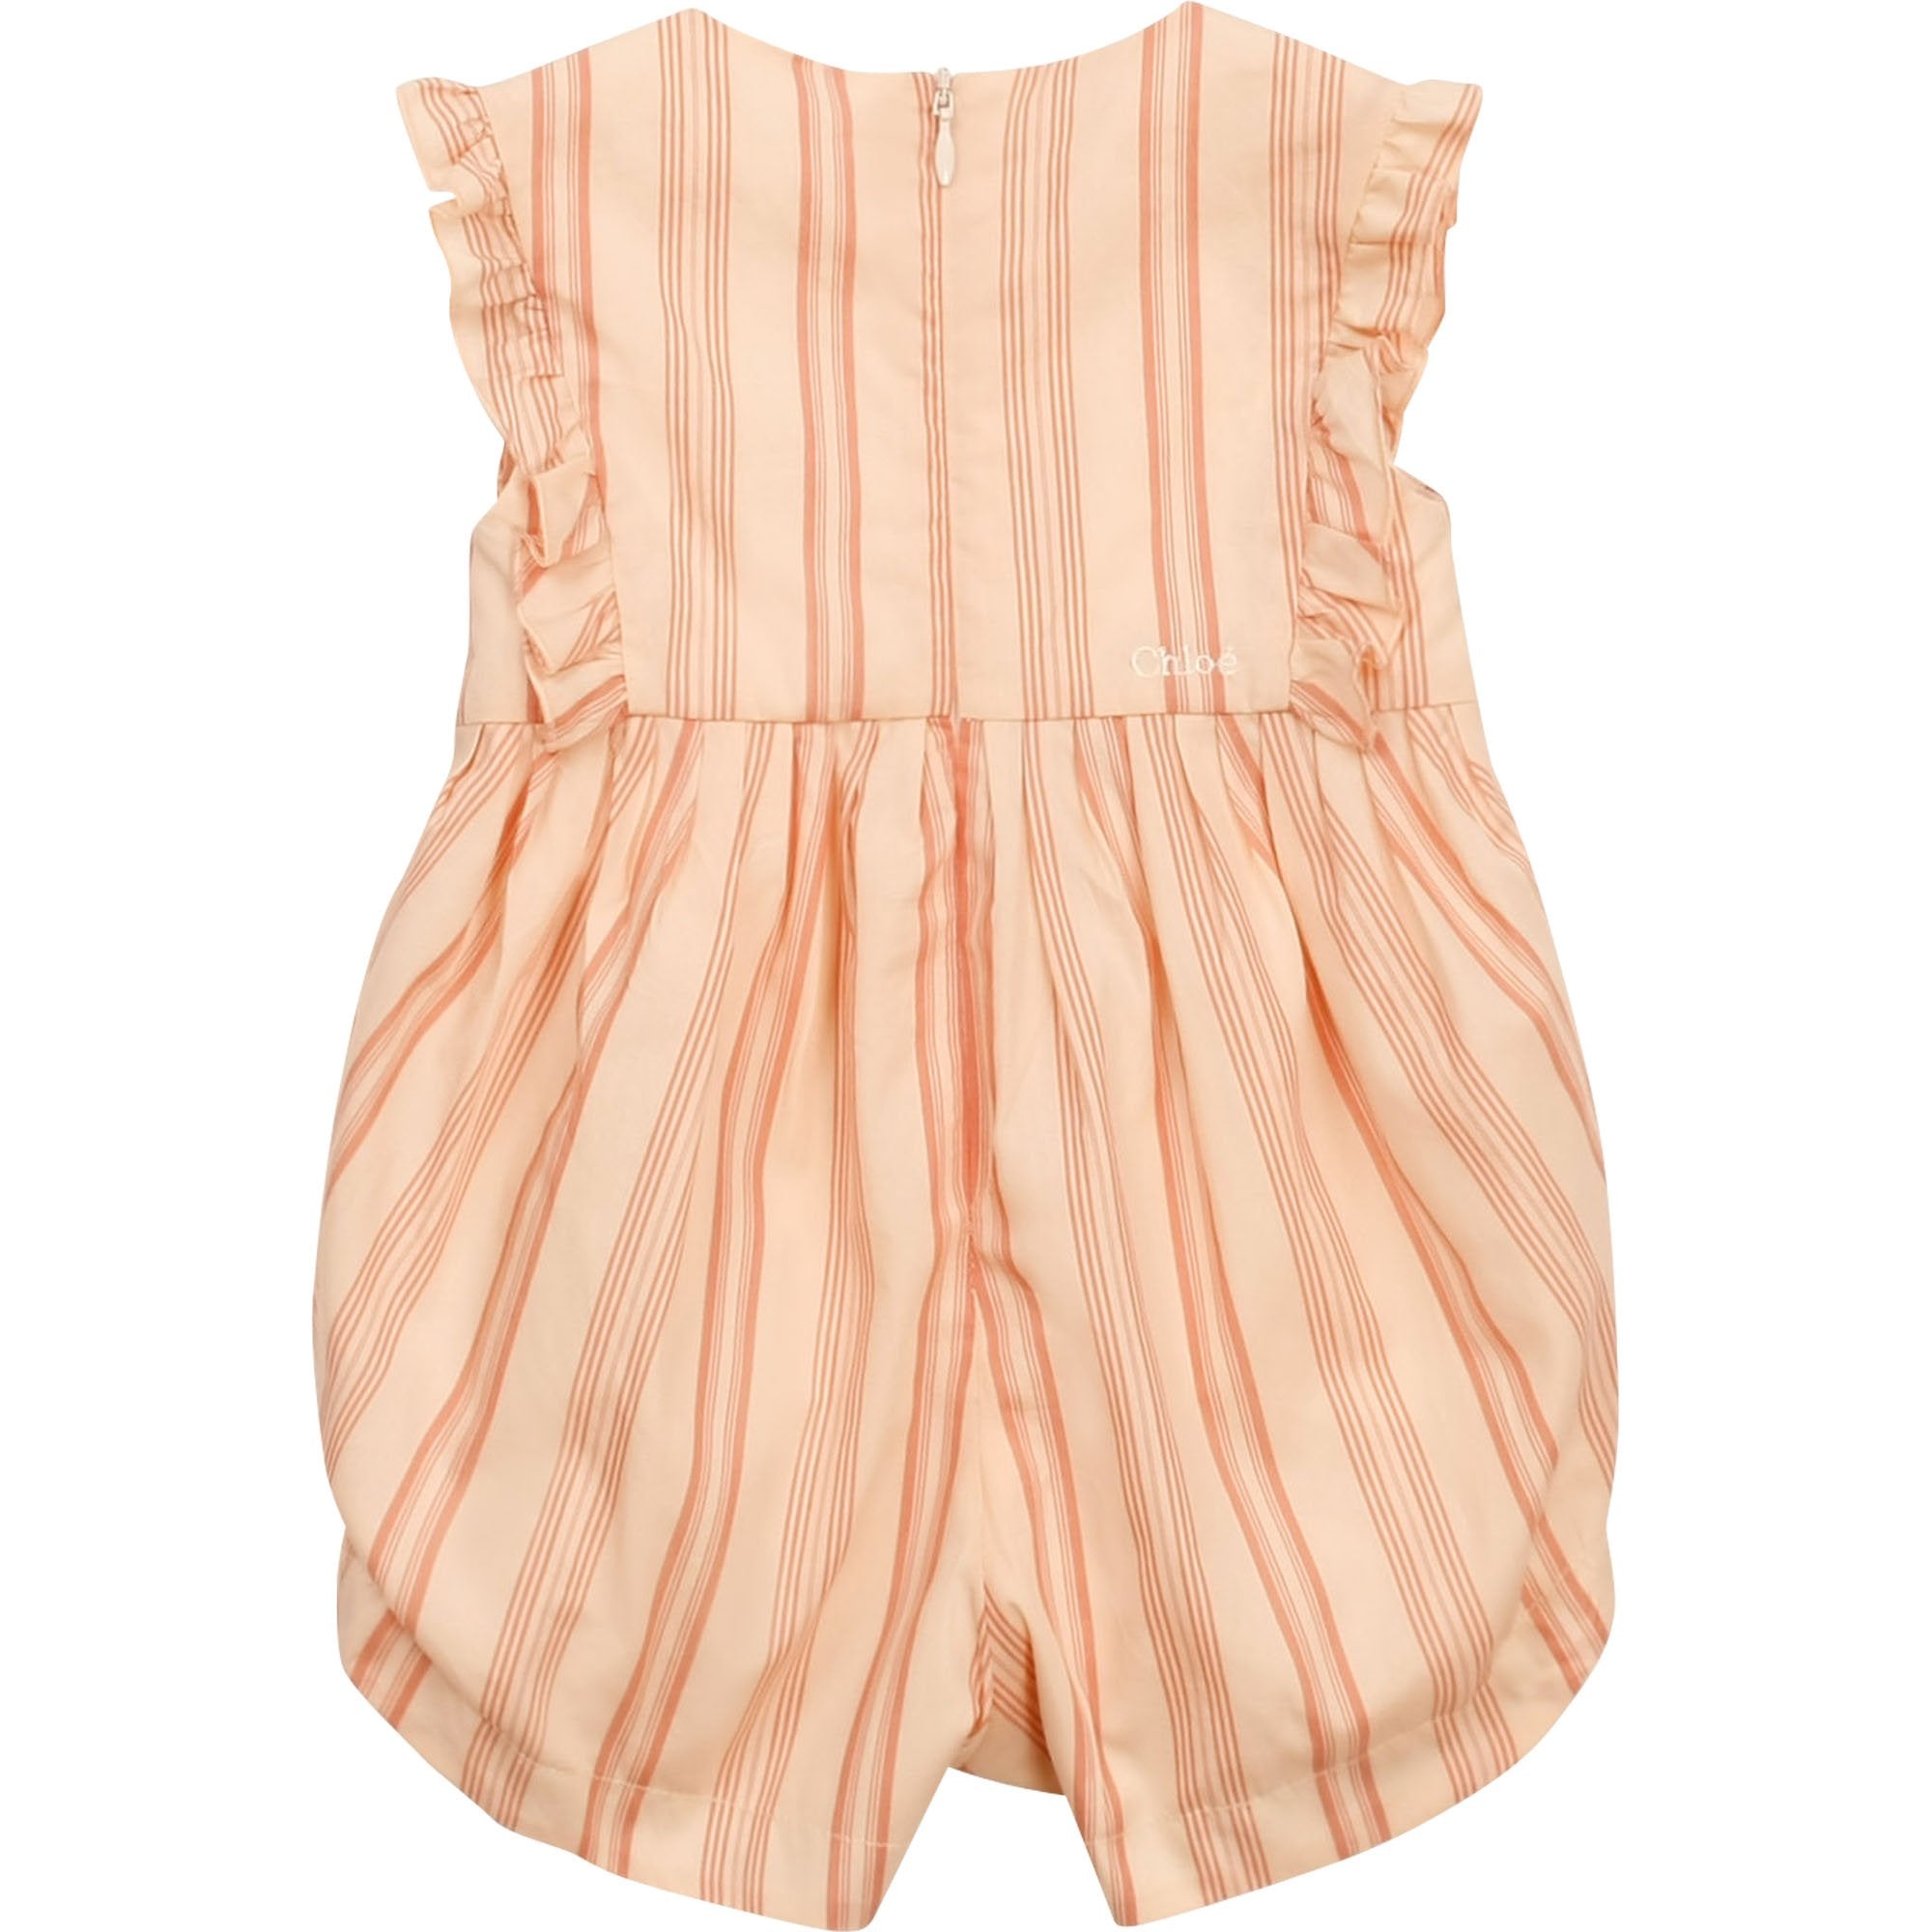 Chloé Girls Pink Striped Cotton Playsuit 2Y